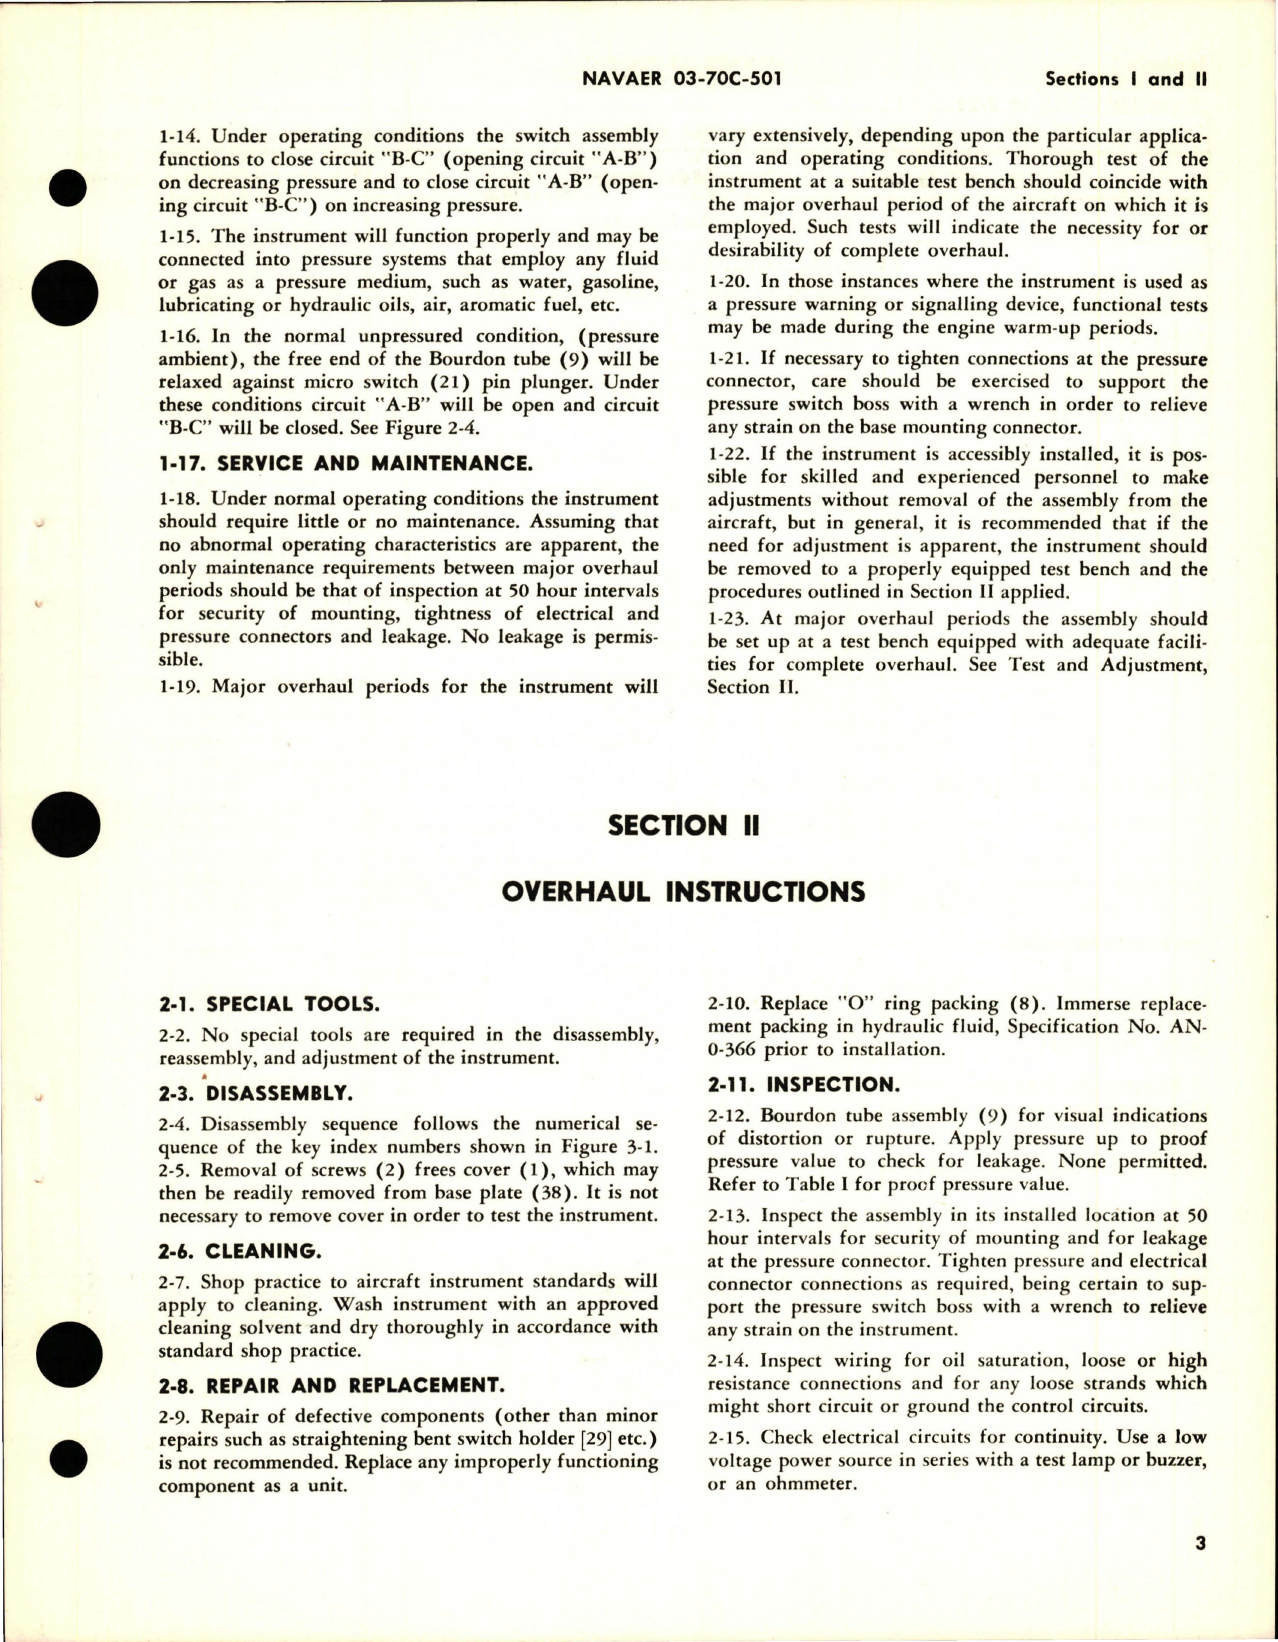 Sample page 5 from AirCorps Library document: Operation, Service and Overhaul Instructions with Parts Breakdown for Pressure Actuated Switch - Model 1510-80